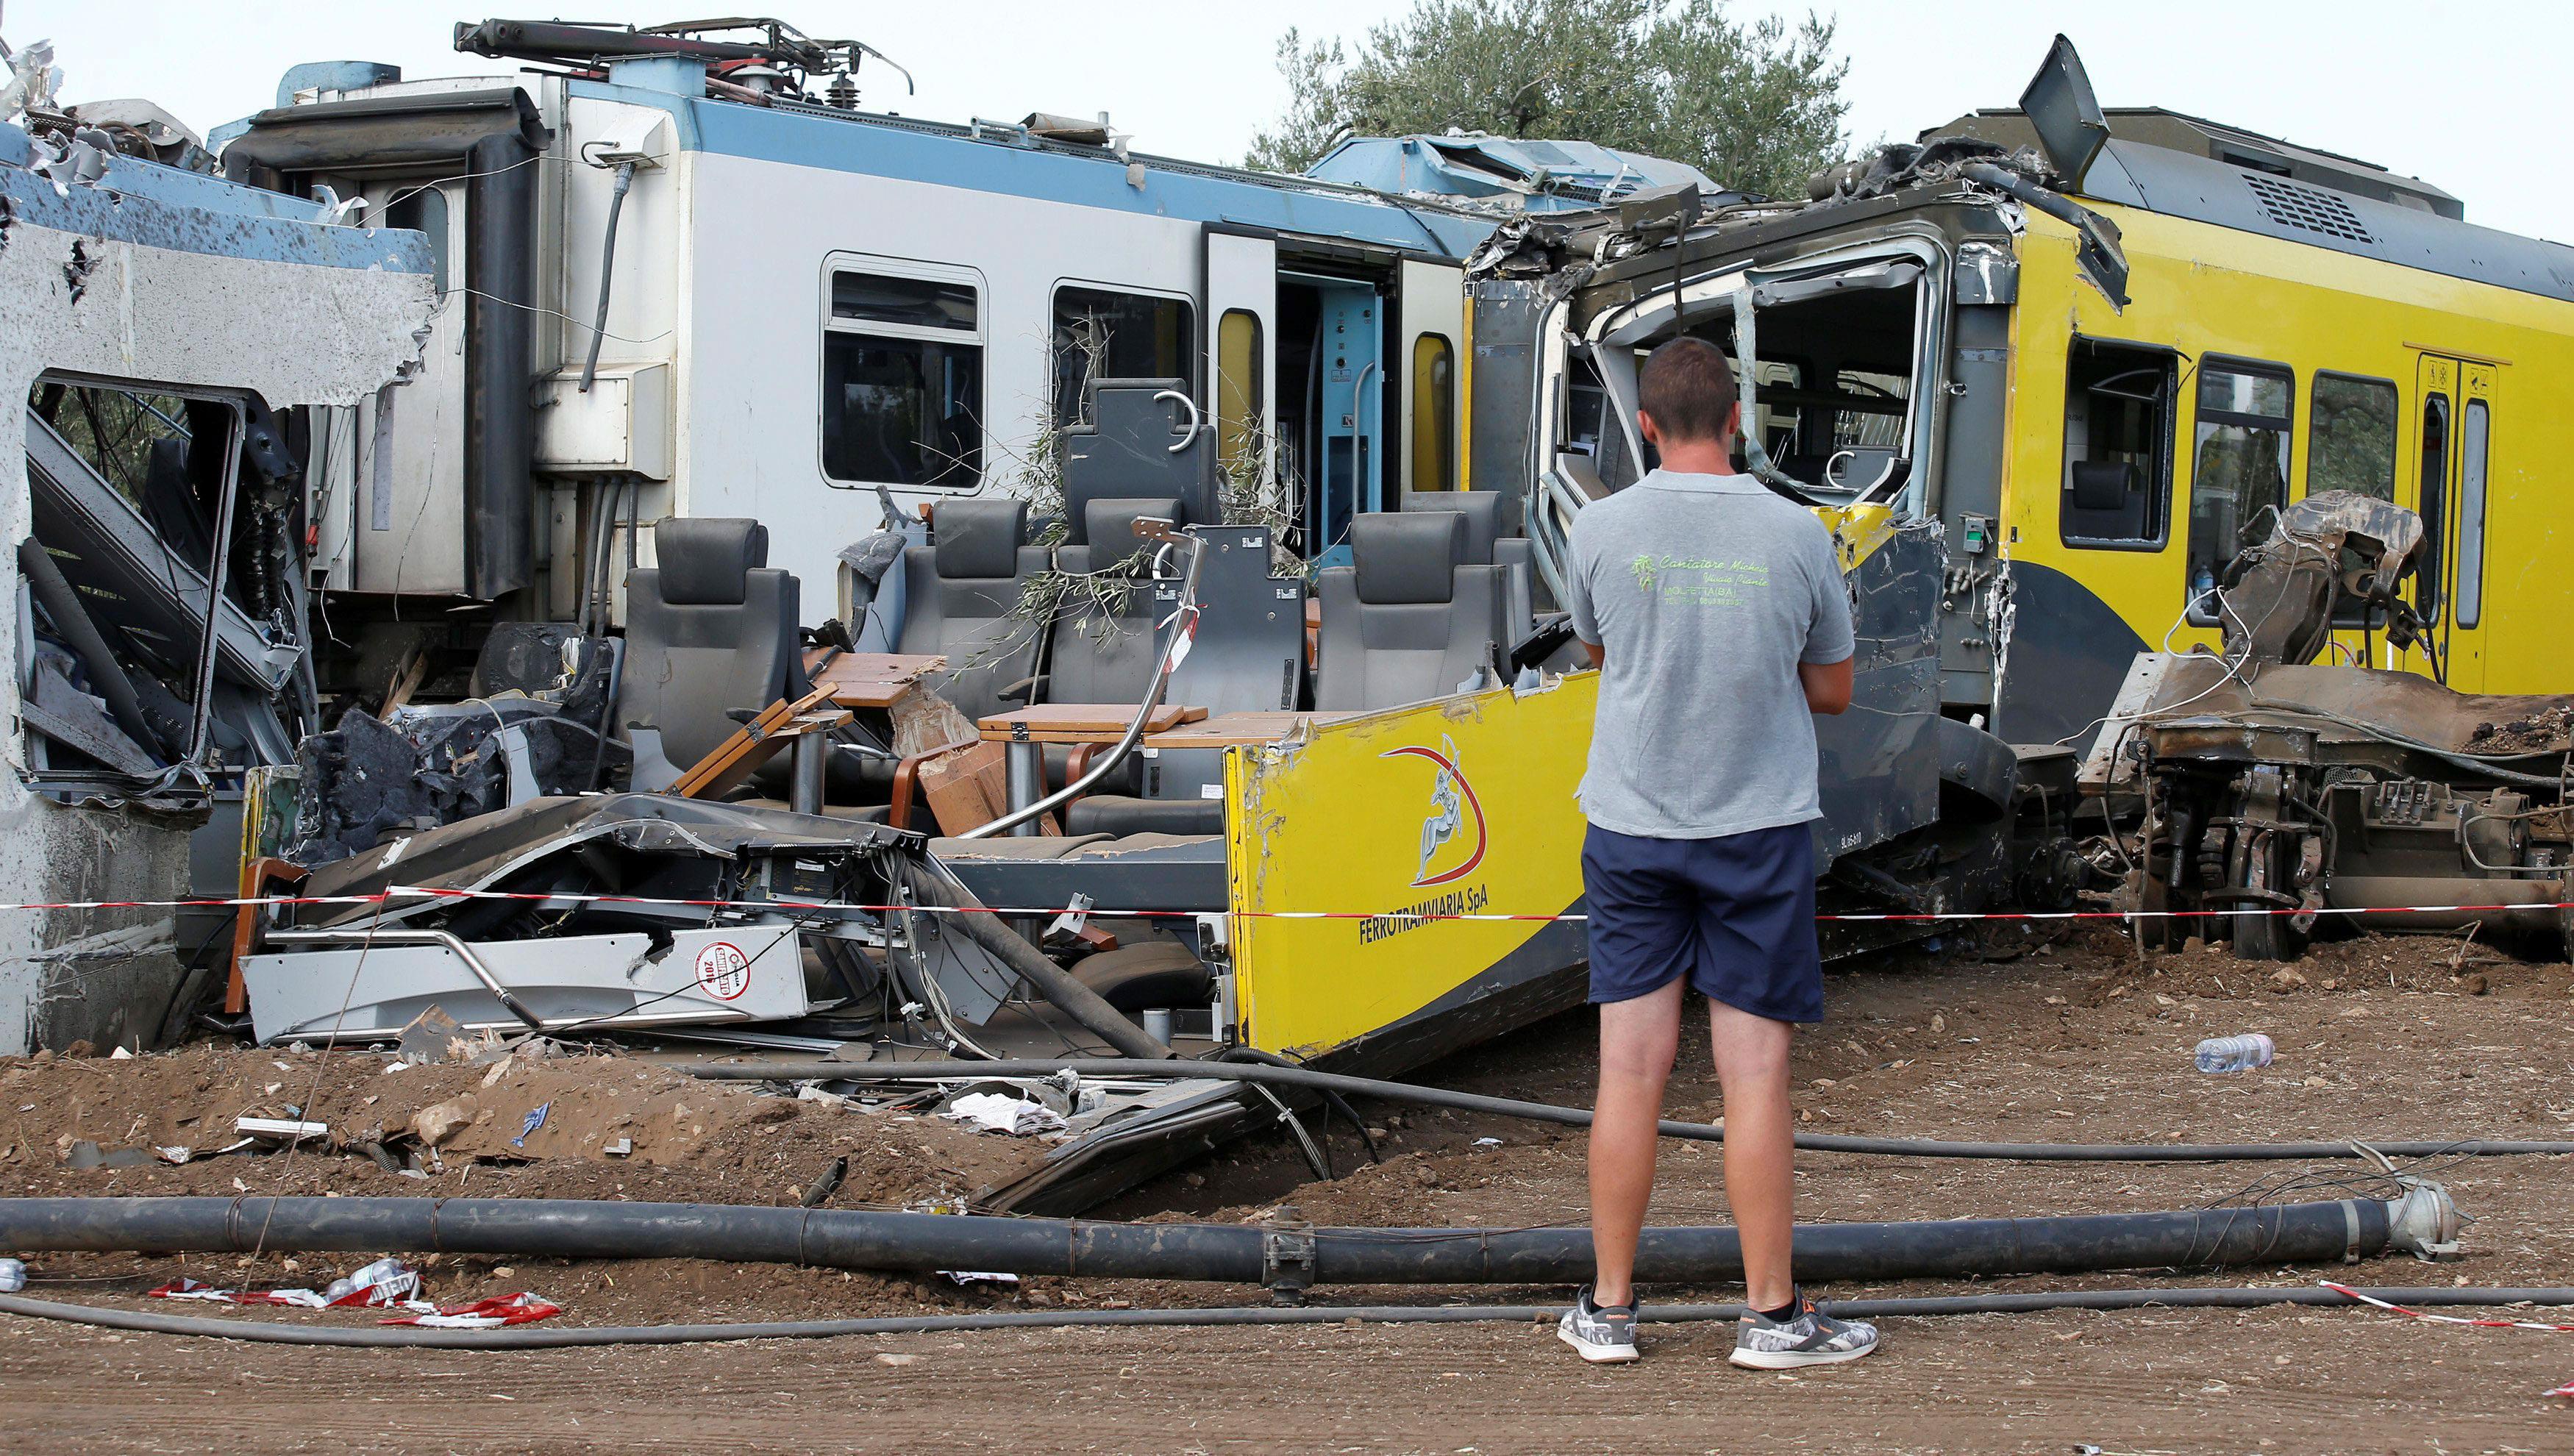 Workers are seen at the wreckage at the site where two passenger trains collided in the middle of an